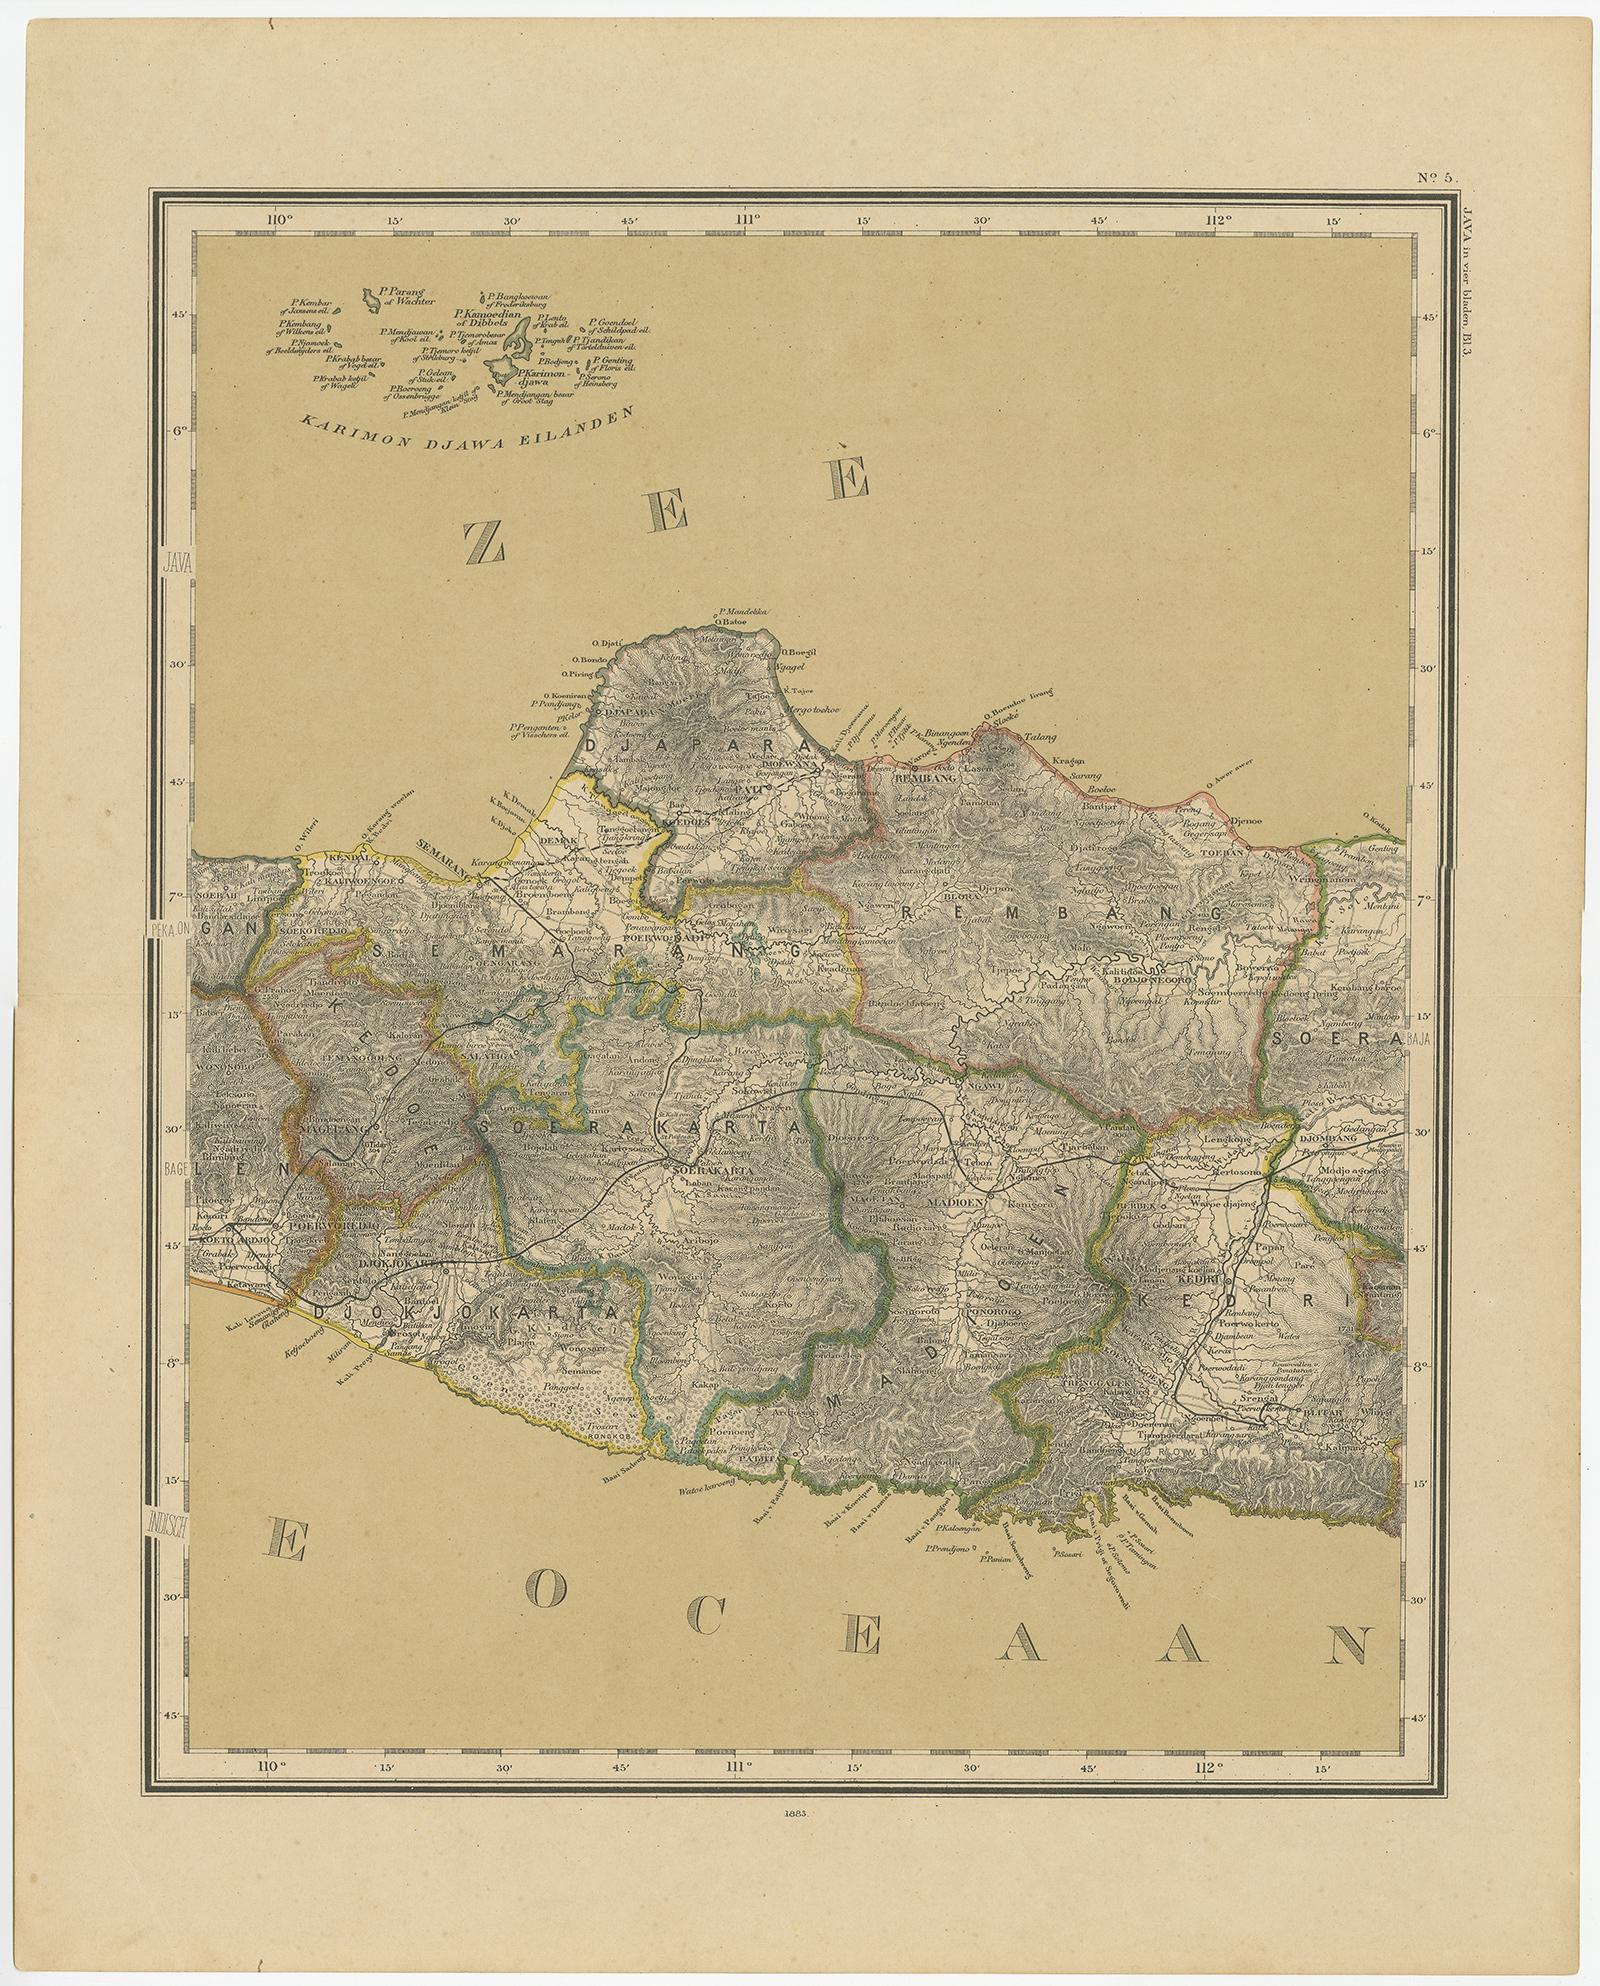 Detailed map of Java in 4 sheets, with an inset map of Batavia (Jakarta). This map originates from 'Atlas van Nederlandsch Oost- en West-Indie' by Dr. I. Dornseiffen. Published by Seyffardt's Boekhandel, Amsterdam.